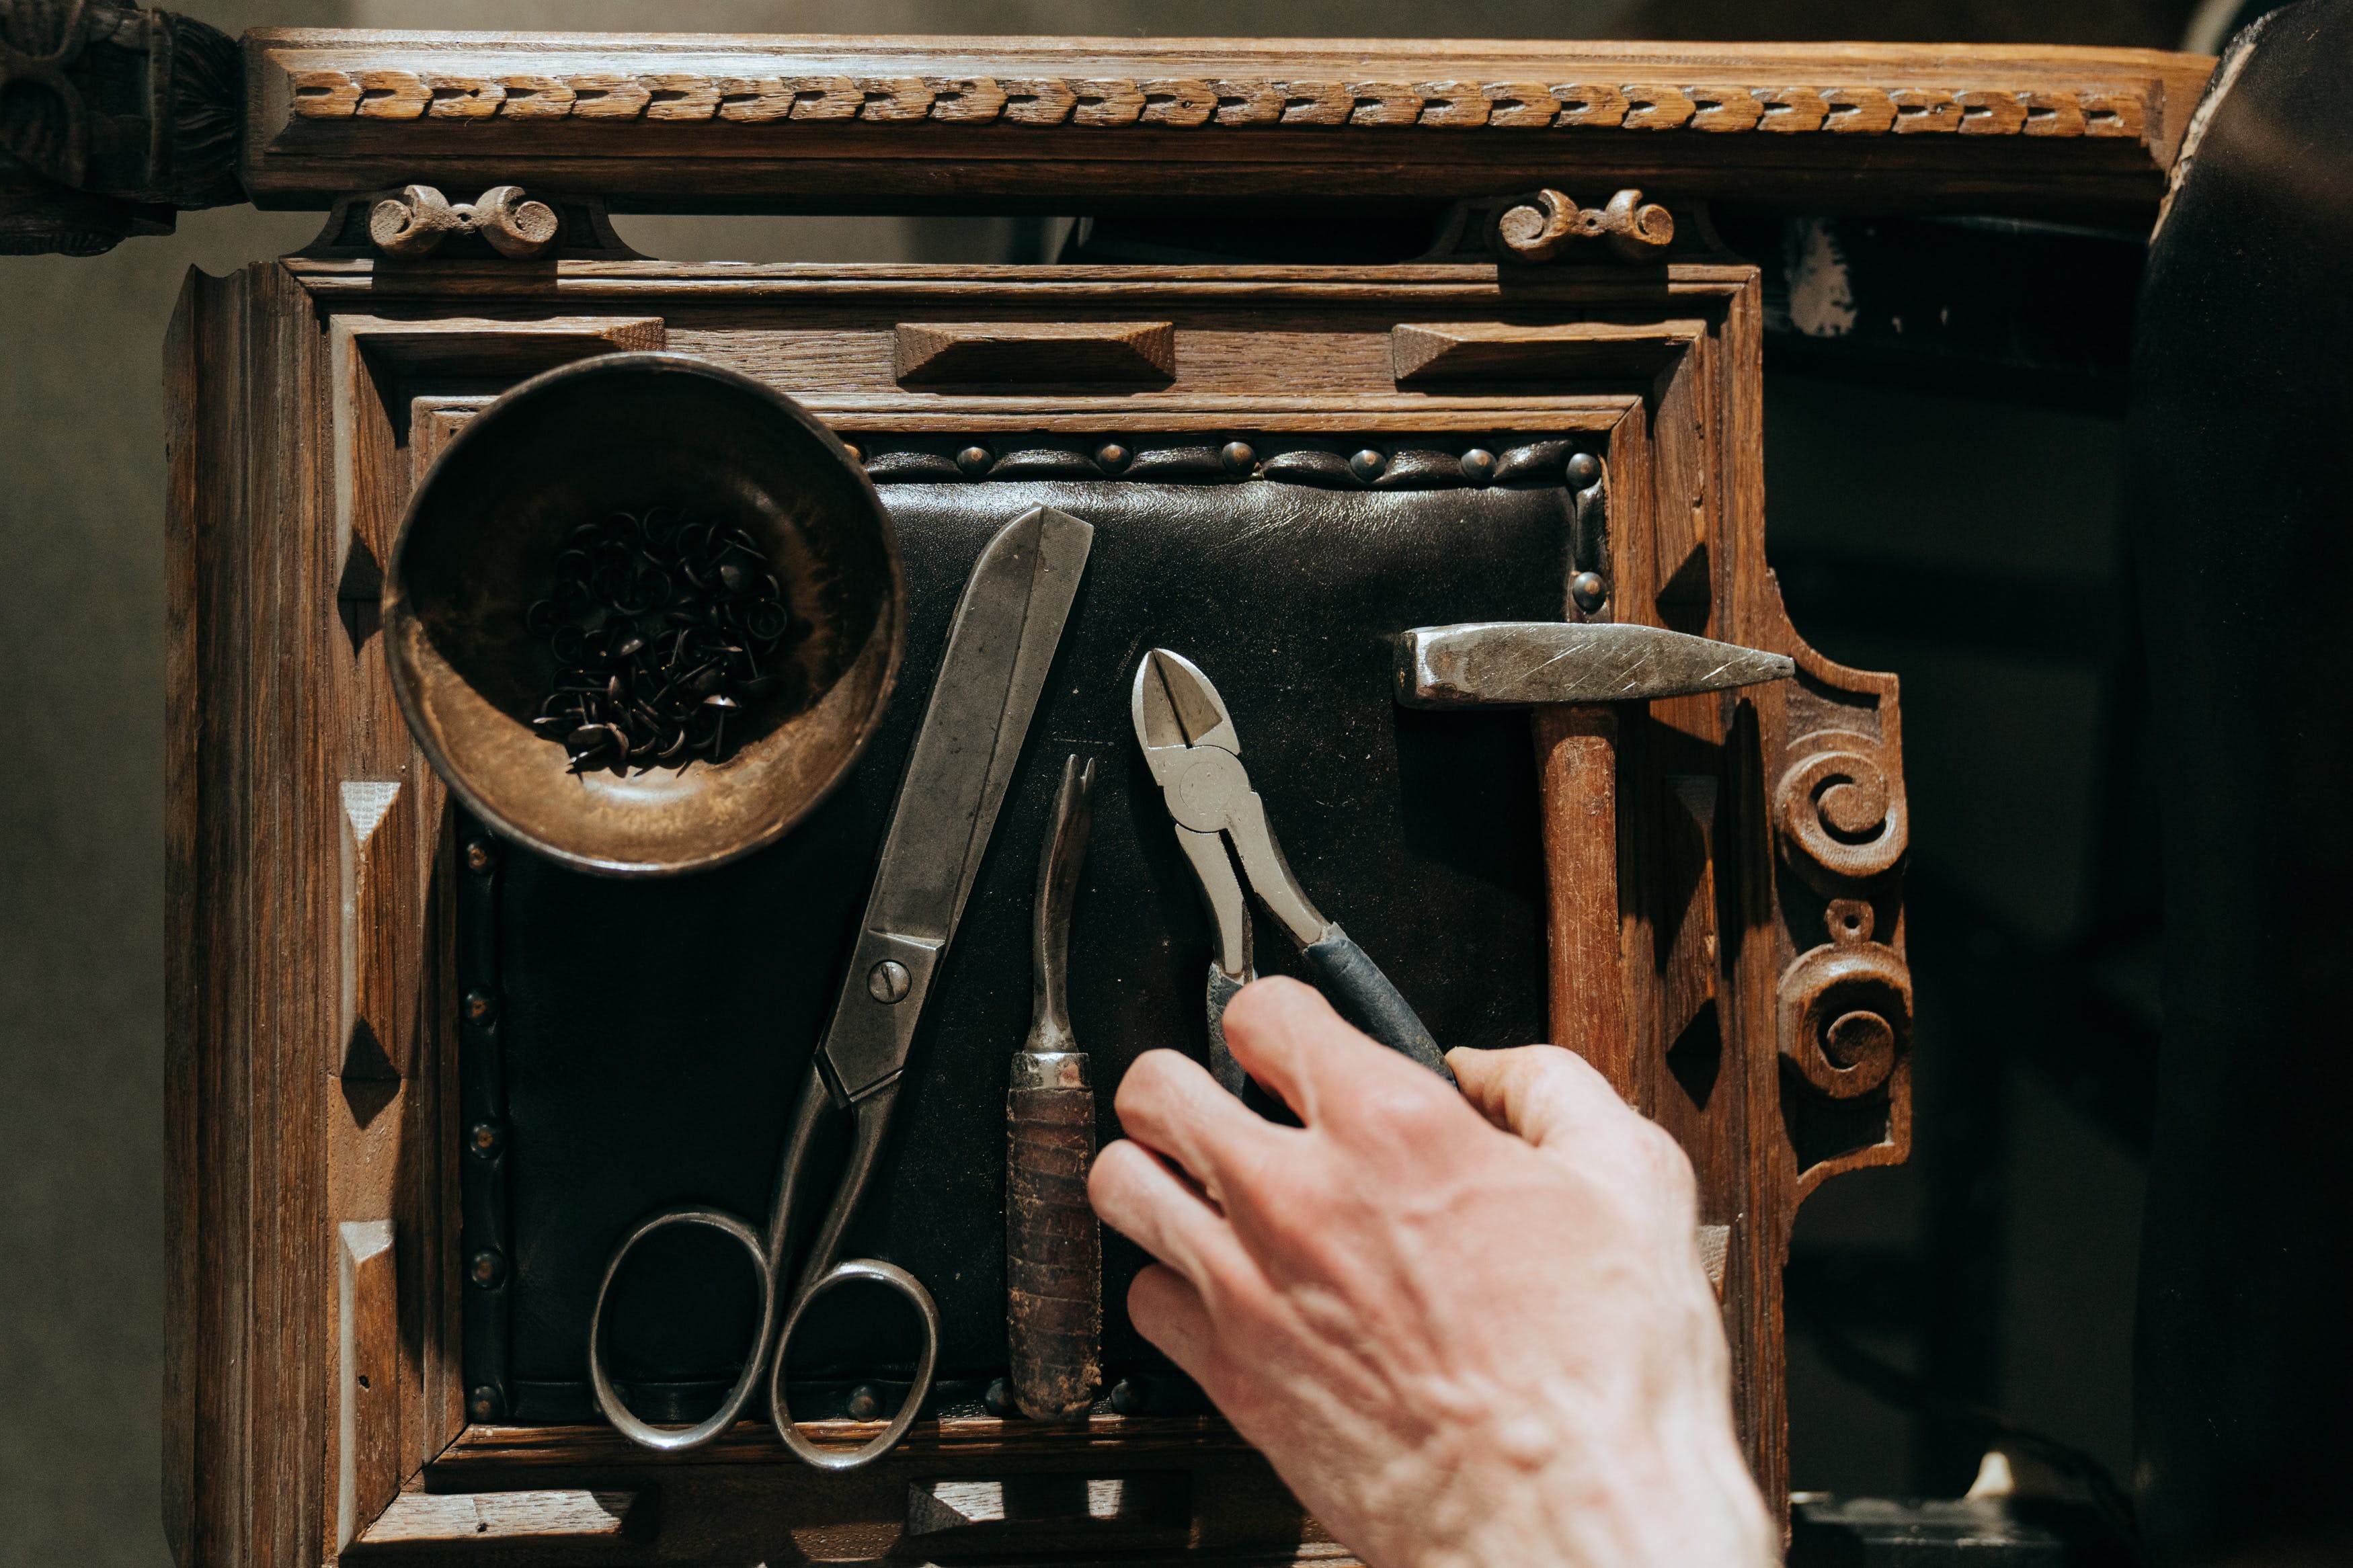 Hand Tools For DIY Enthusiasts: A Comprehensive Guide